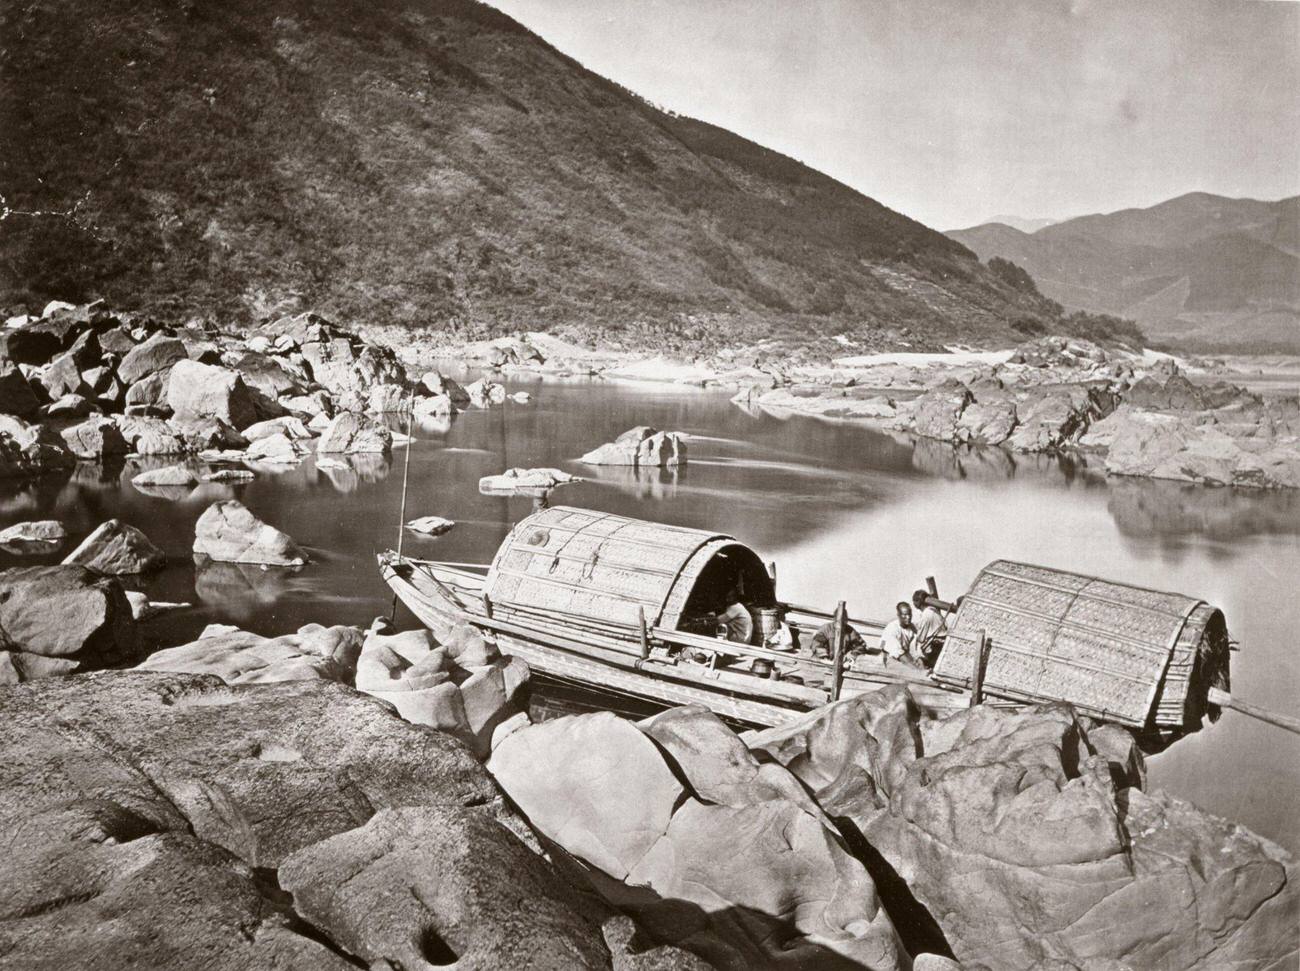 A Rapid Boat by John Thomson, 1871